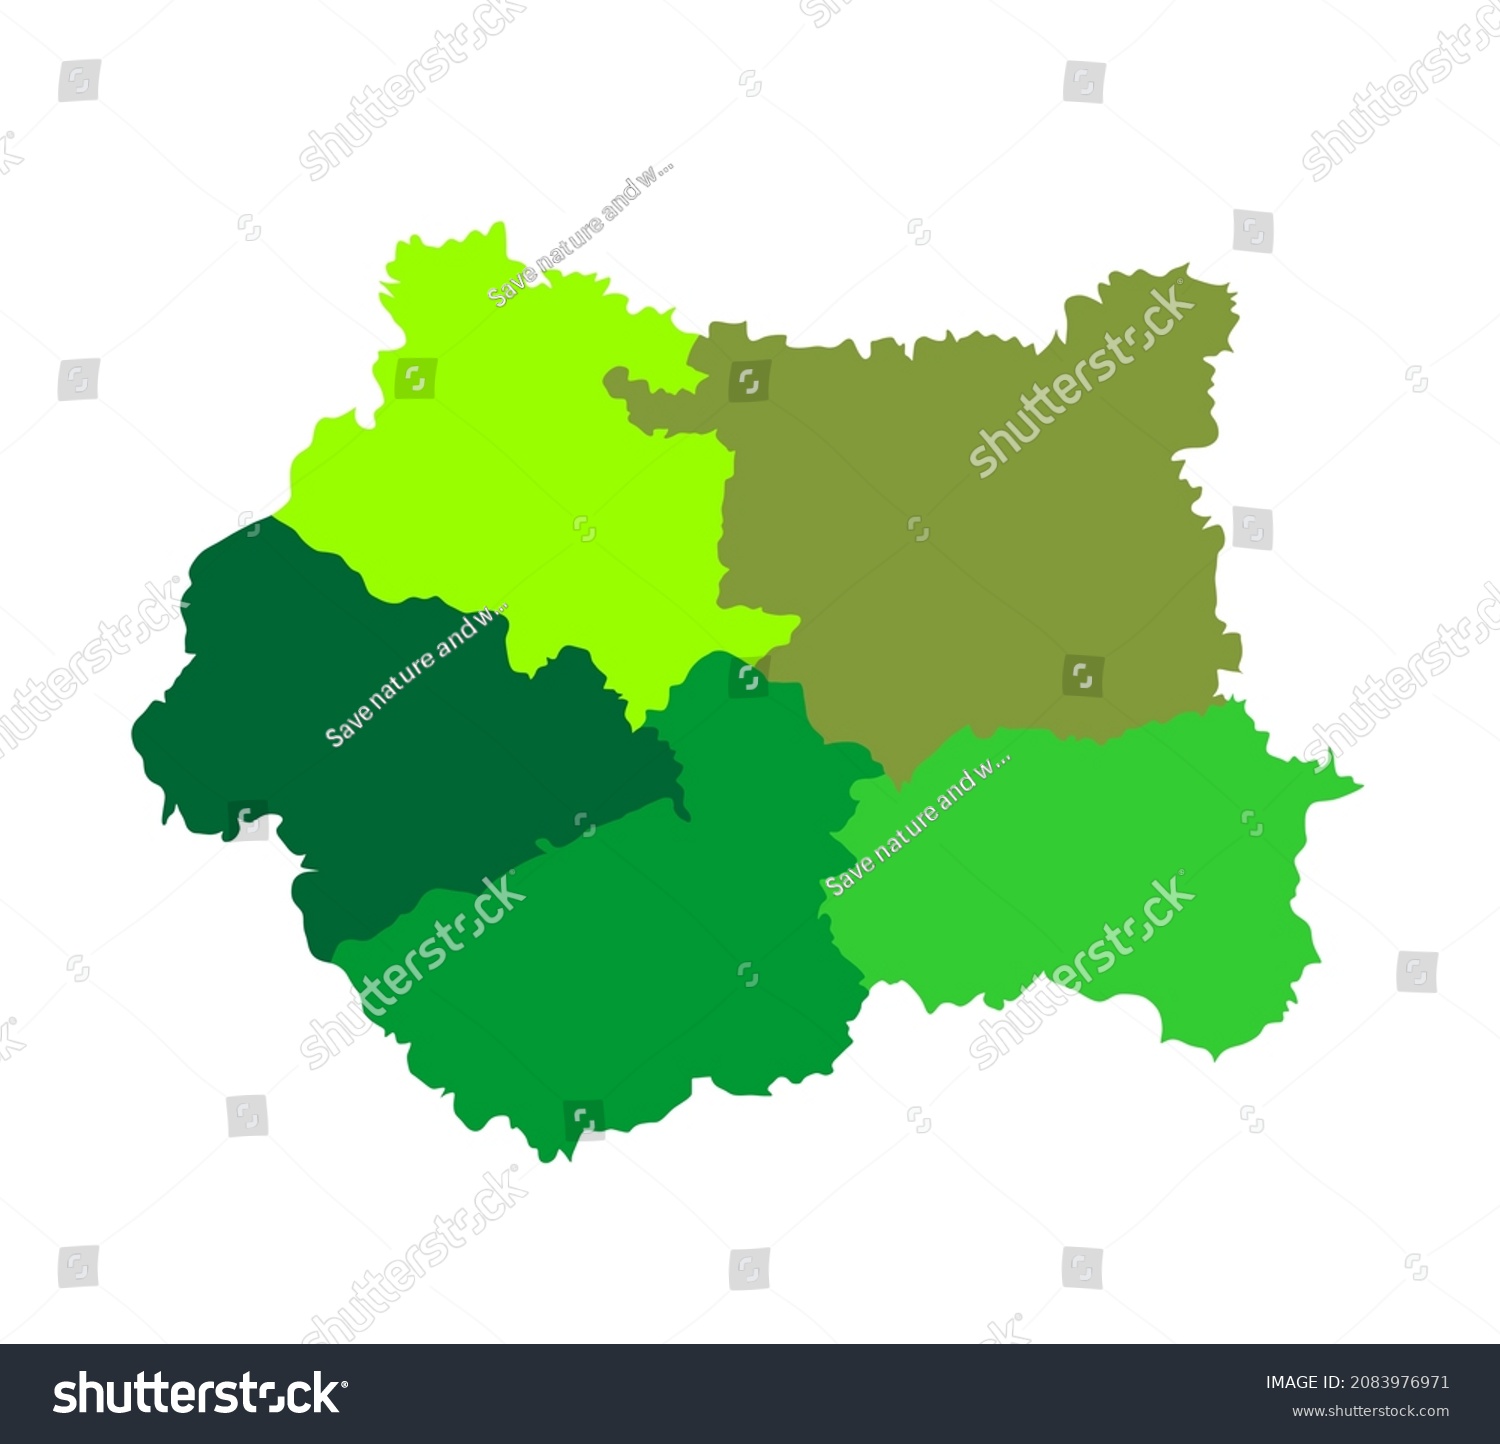 SVG of West Yorkshire vector map silhouette illustration in Yorkshire and the Humber, metropolitan county in England. Separated regions with borders. svg